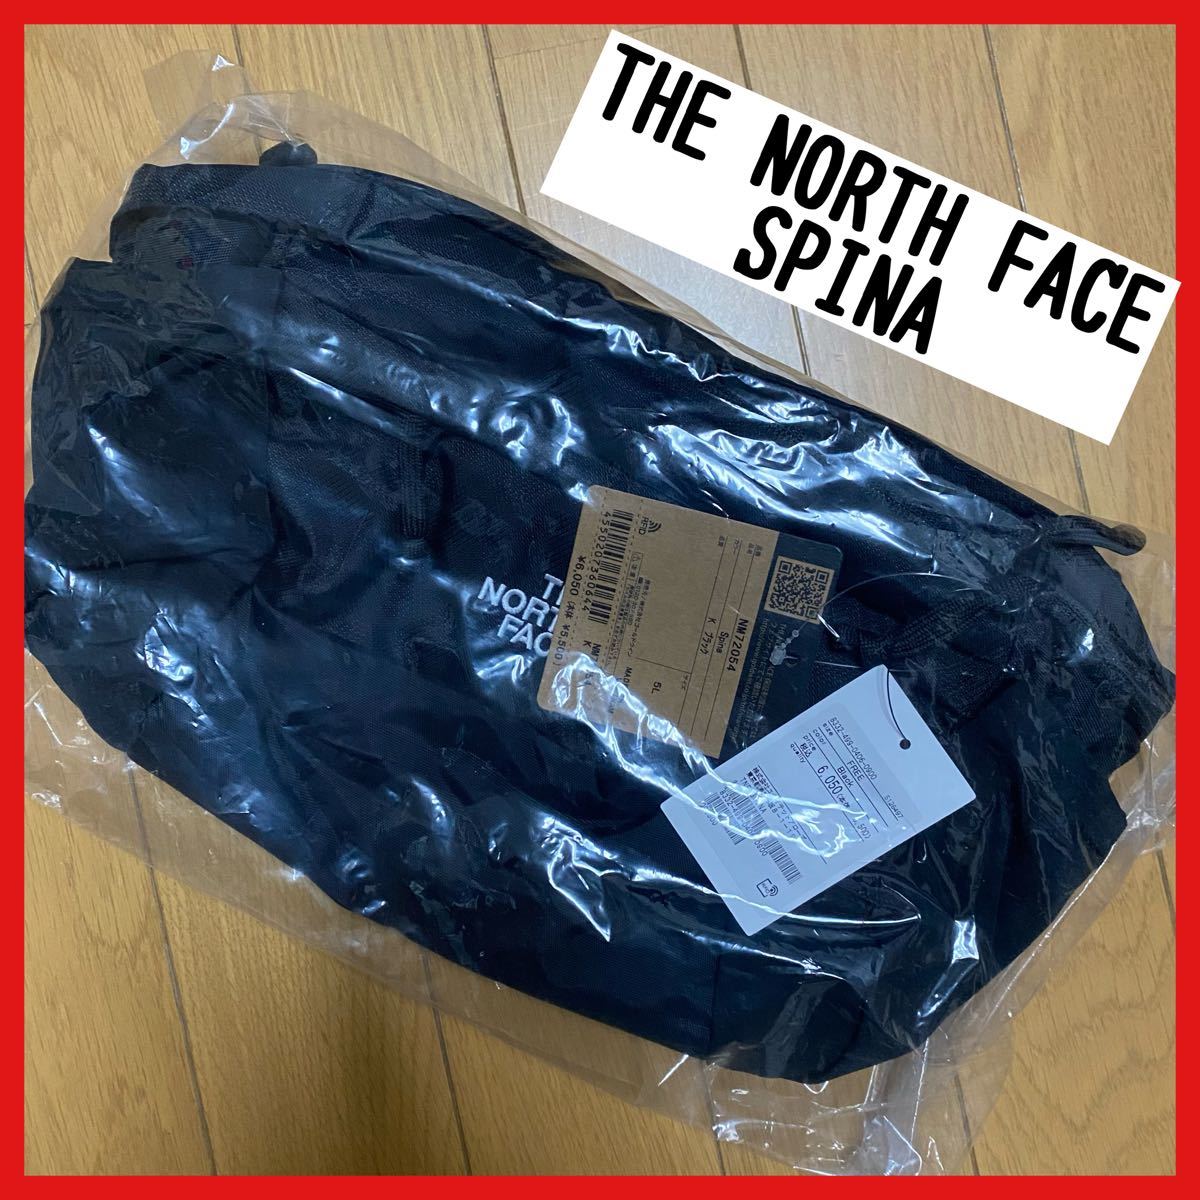  THE NORTH FACE SPINA/ウエストバッグ バッグ ウエストポーチ ブラック【送料無料】